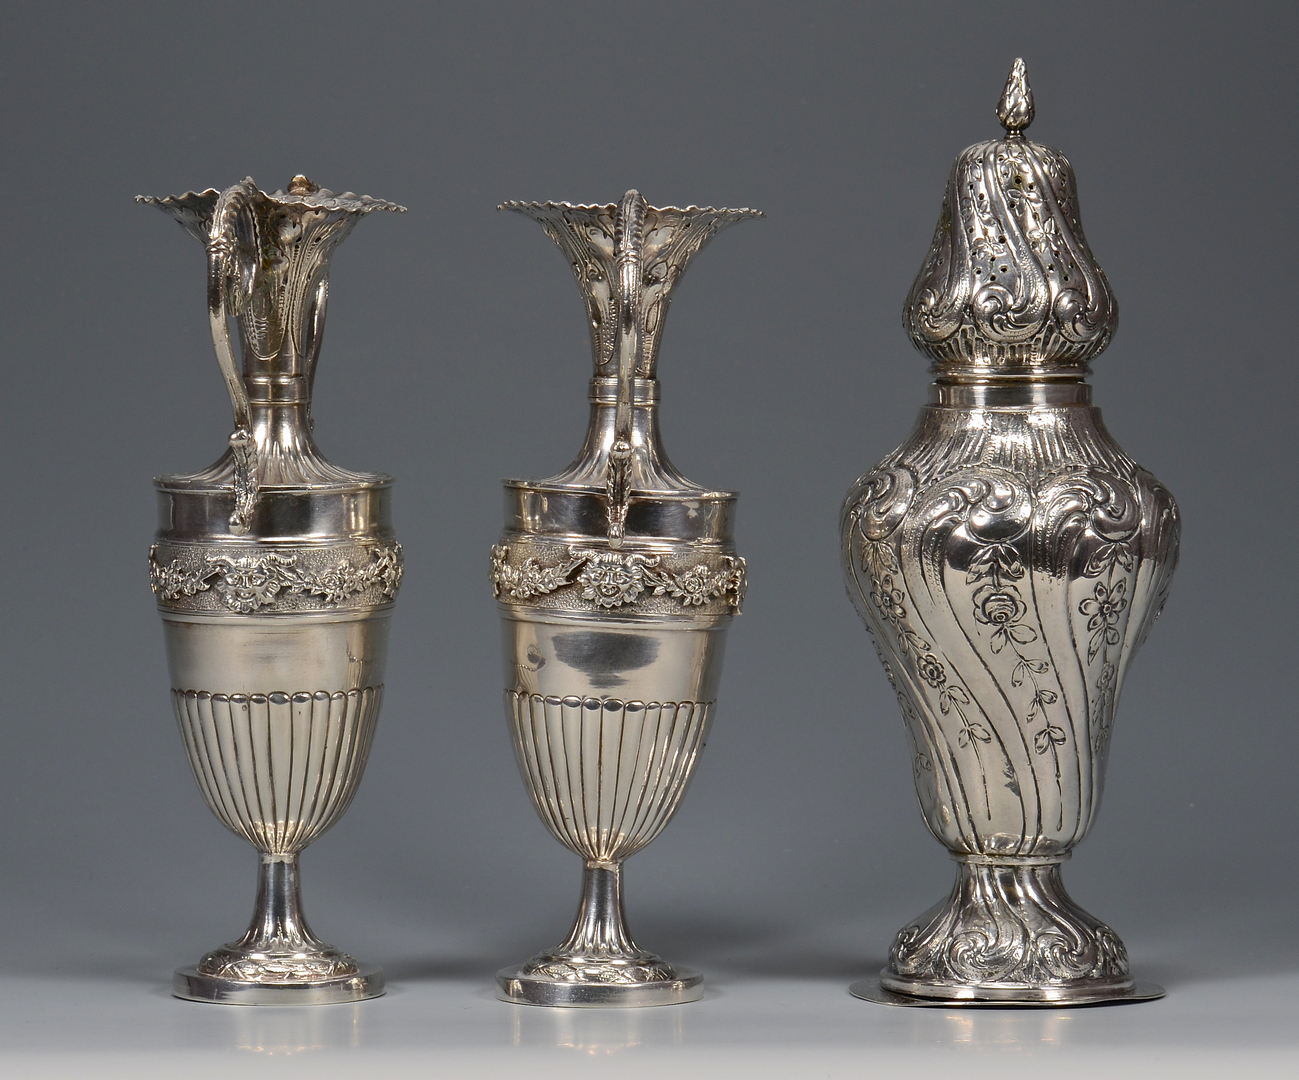 Lot 31: Hanau Silver Urns and Caster